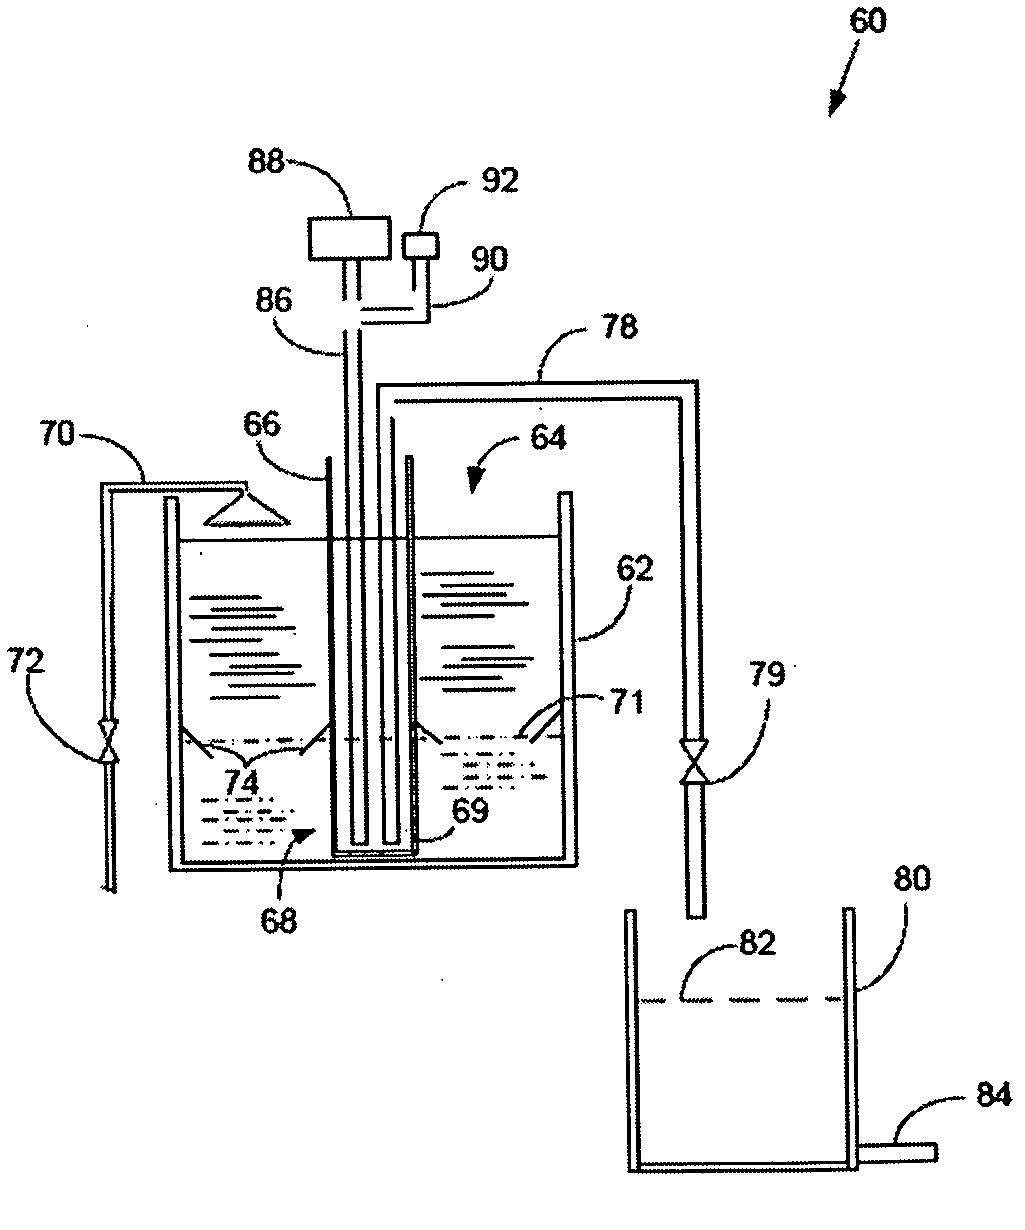 Feeder for dispensing a solution of a solid matter dissolved therein